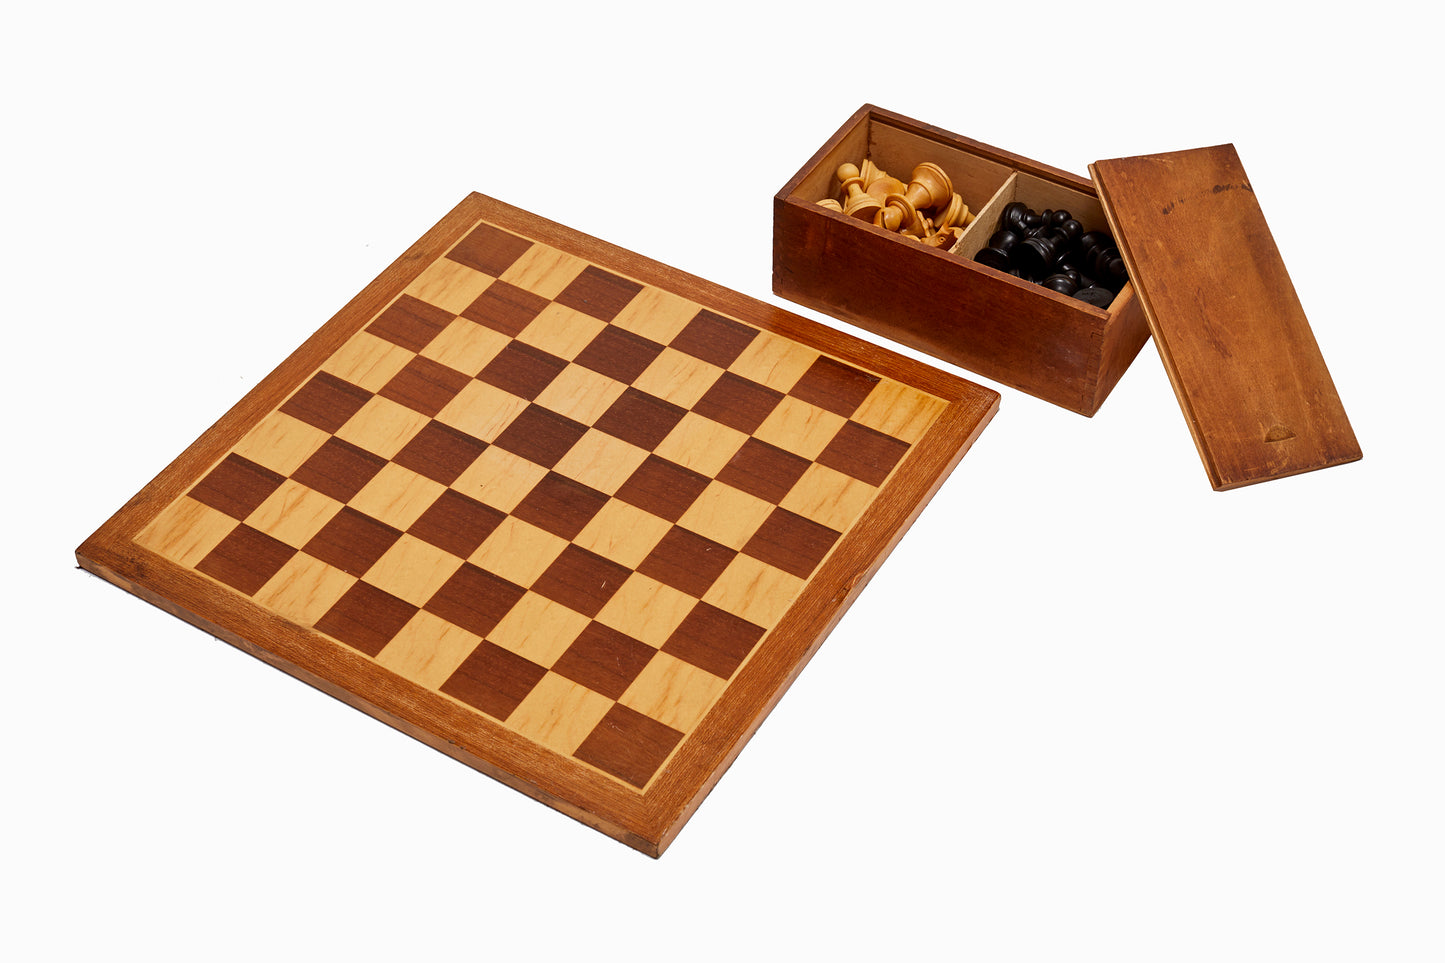 VIntage chess set and board